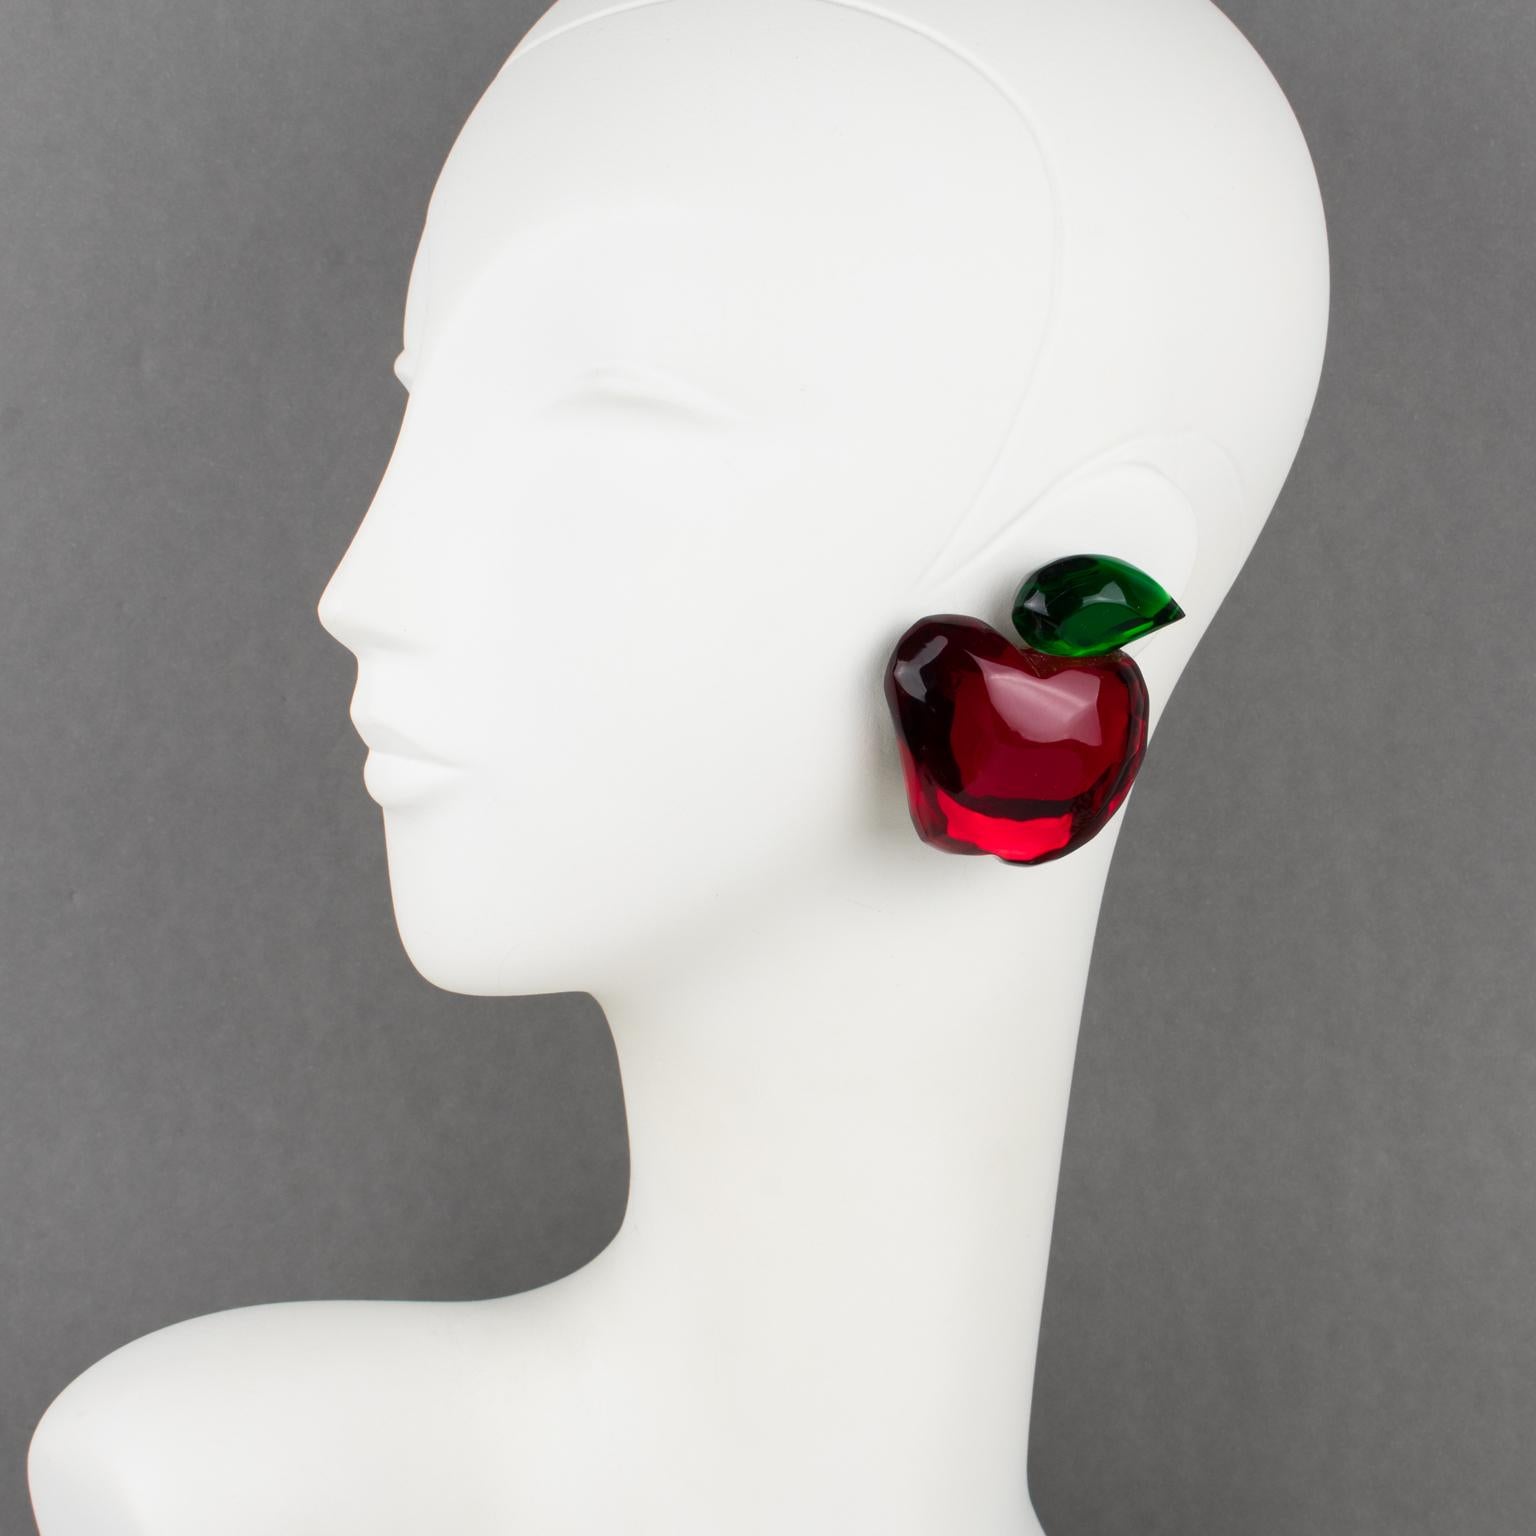 Whimsical oversized Lucite clip-on earrings designed by Harriet Bauknight for Kaso in the 1980s. They feature a dimensional apple shape, all carved with ruby red and emerald green colors and mirror-textured effects. 
The Kaso paper sticker was